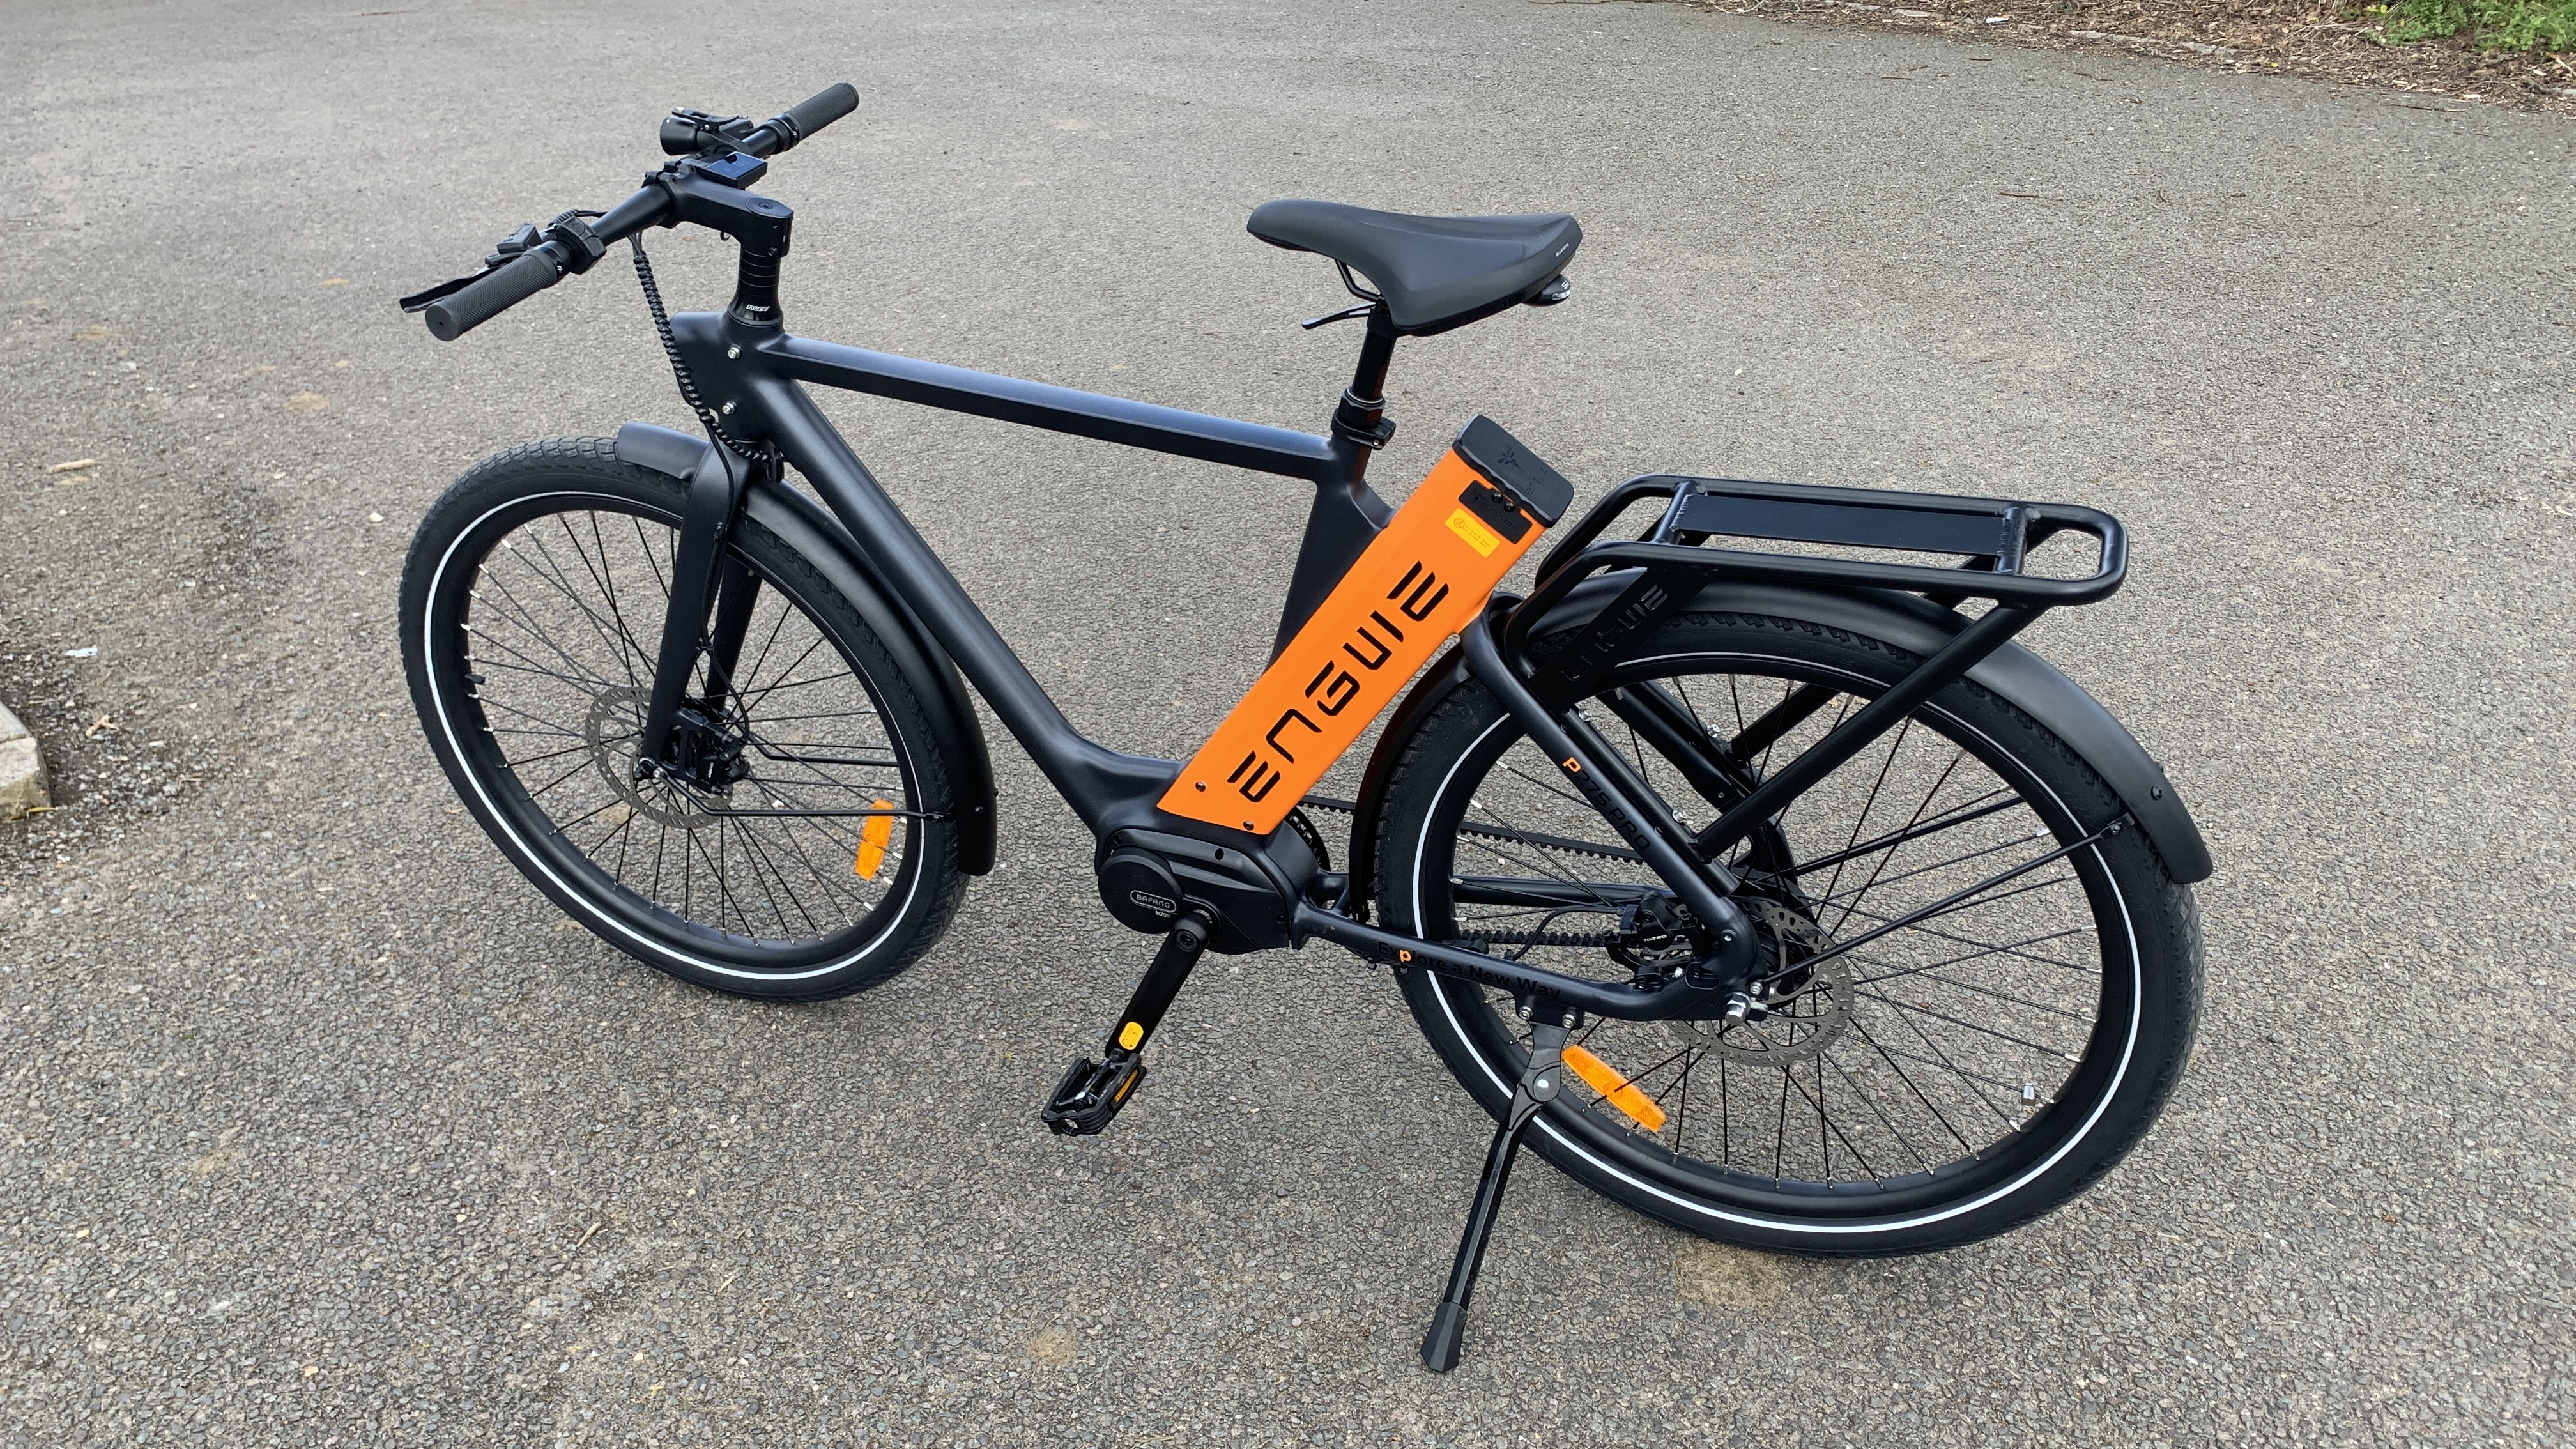 Engwe P275 Pro review: A powerful city e-bike with automatic gear shifter